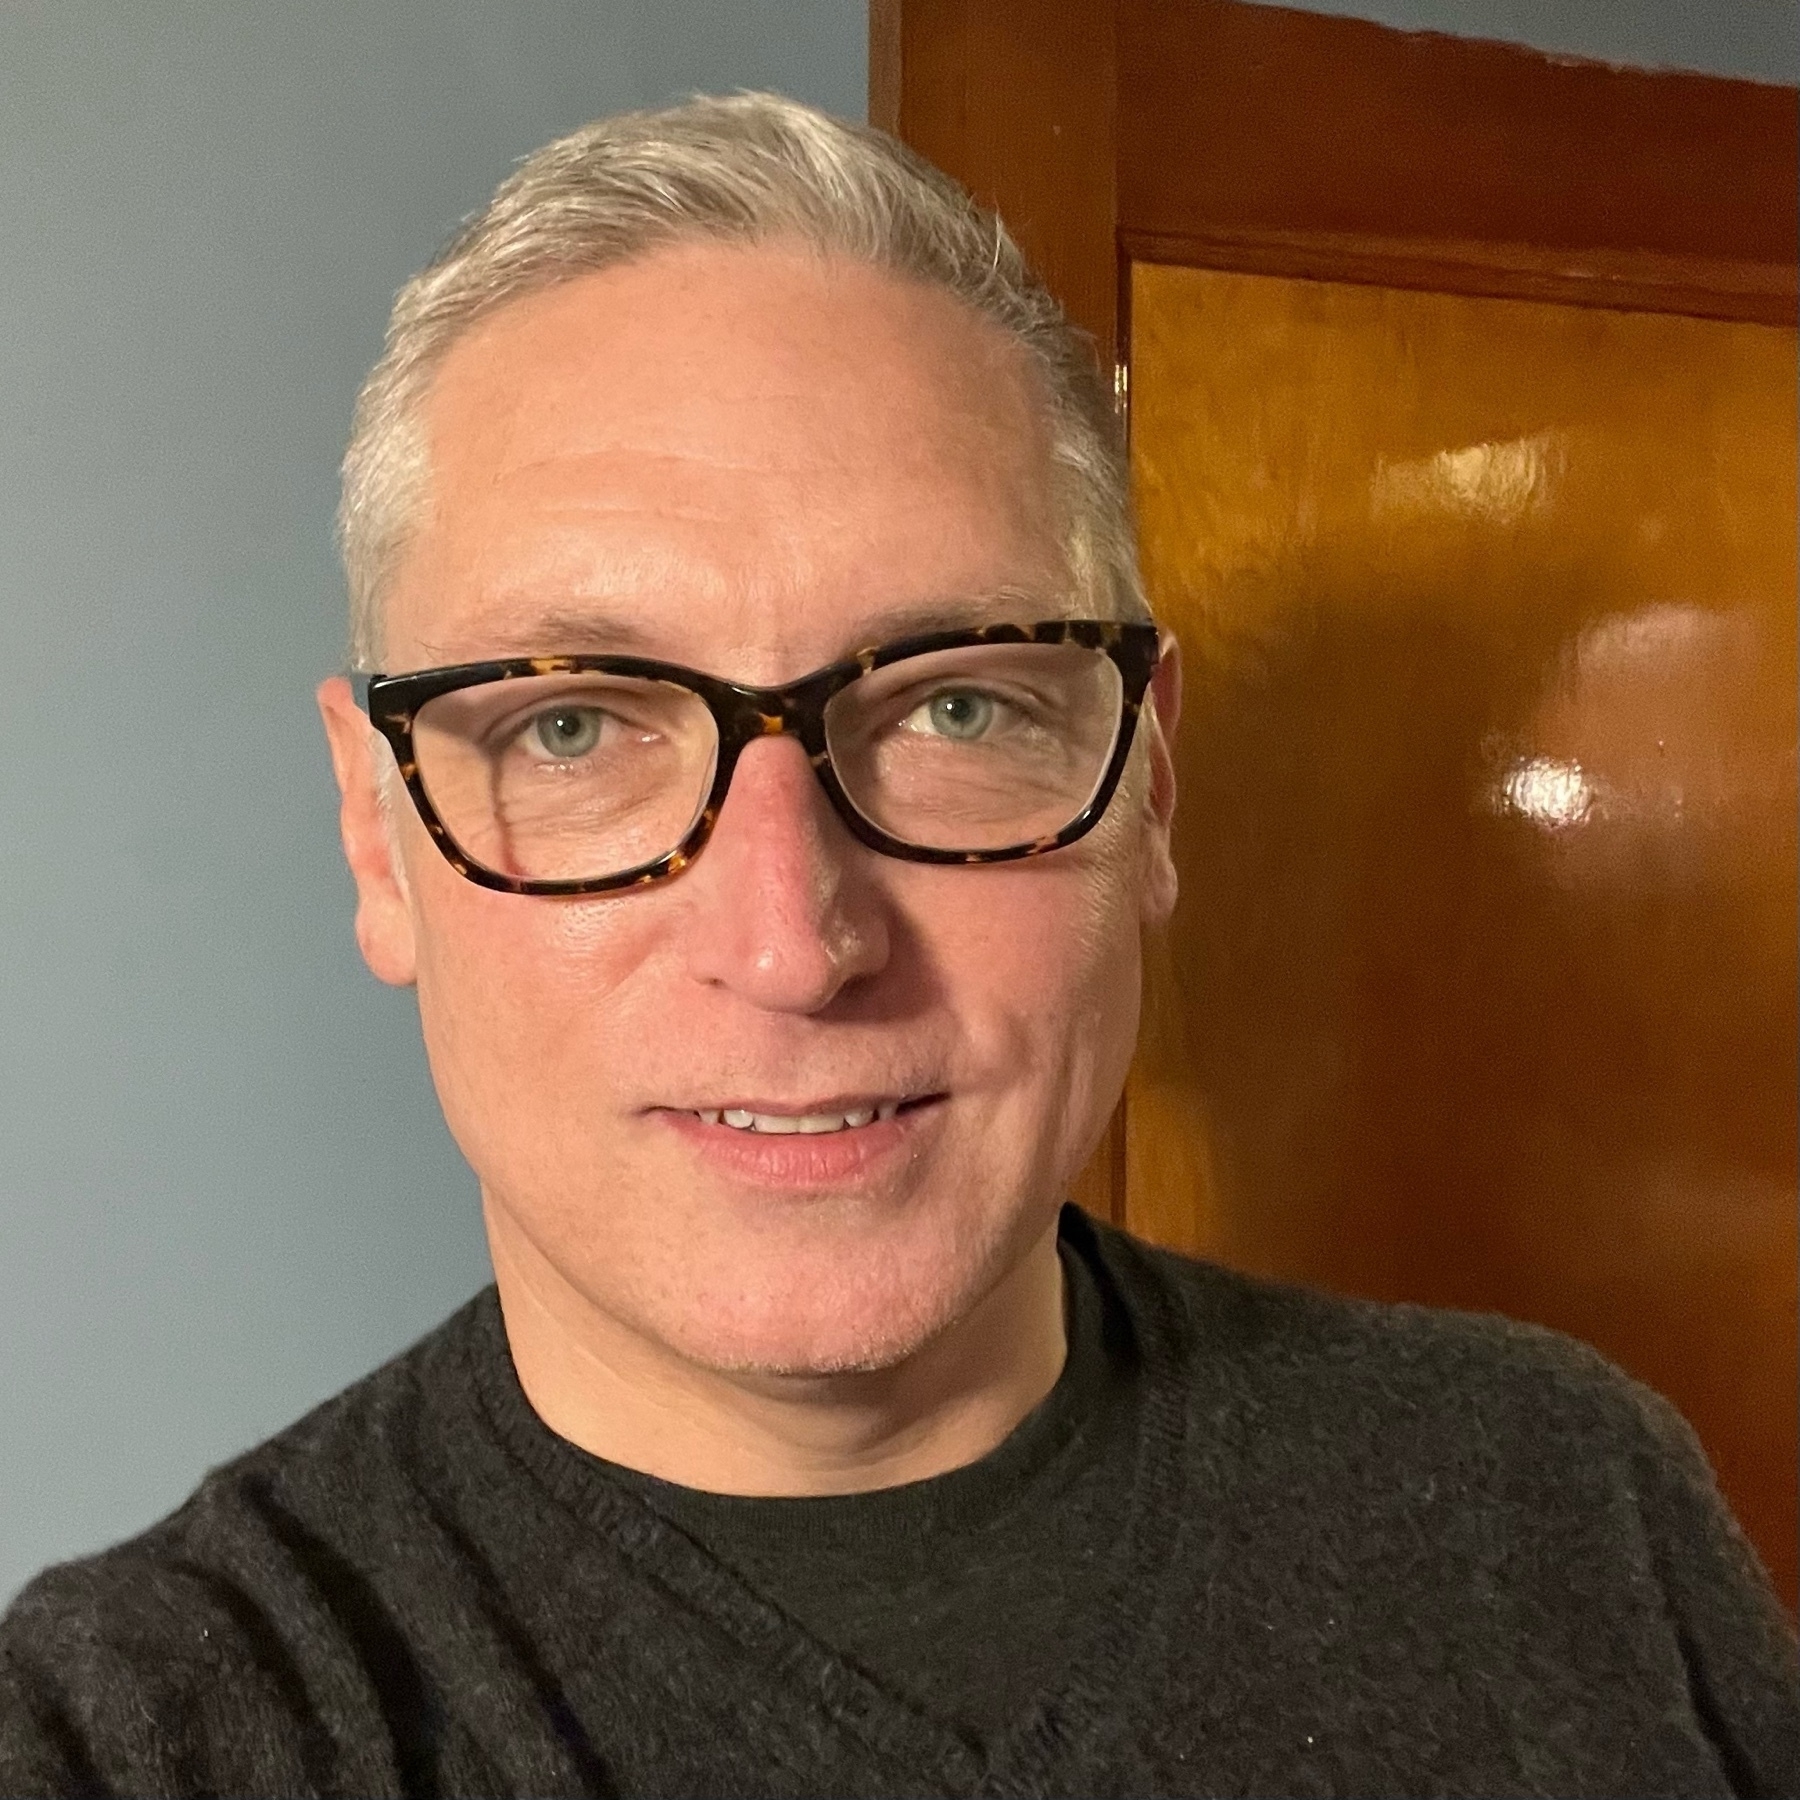 Selfie wearing a black sweater and glasses, looking into camera, shortly cut silver hair